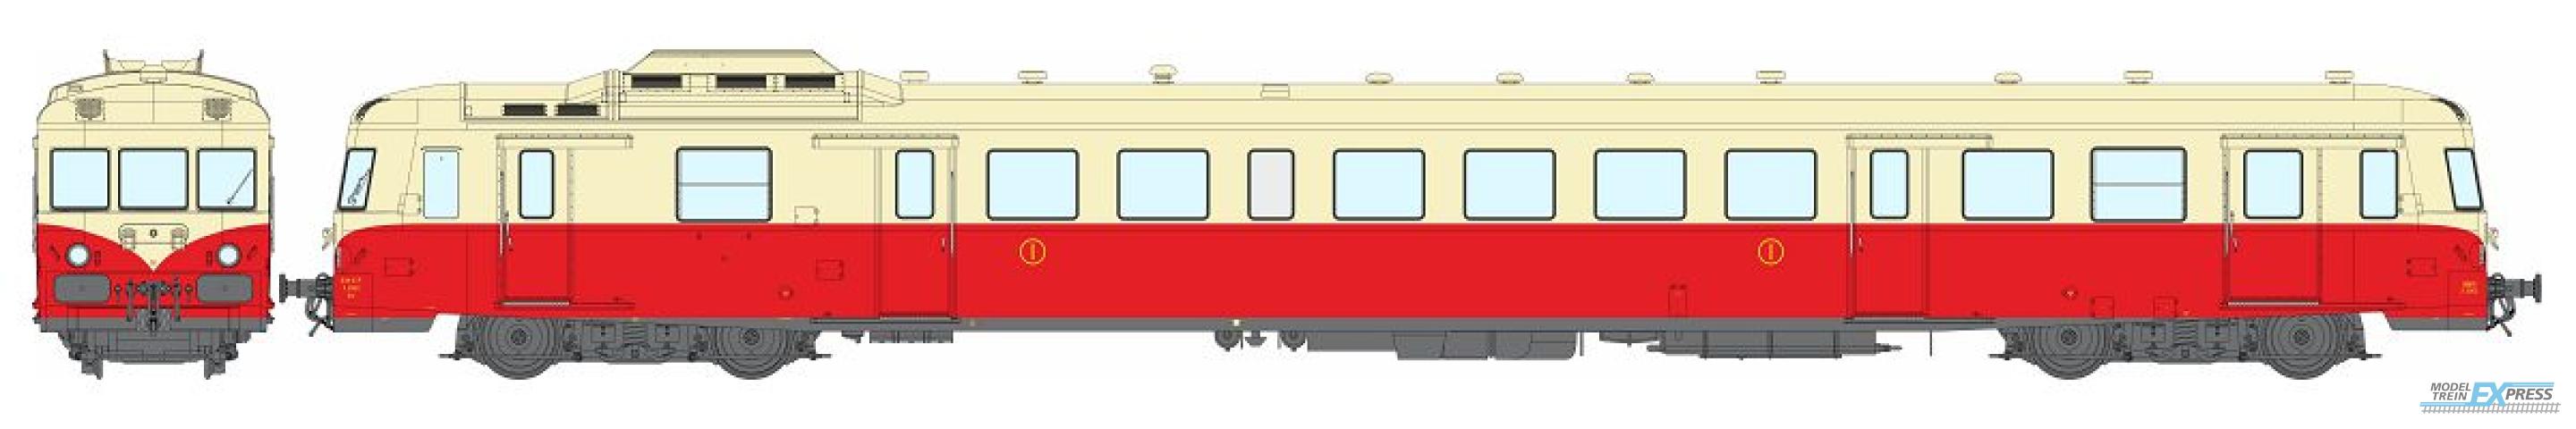 REE models MB-227 X 2902 with skirt, 1st class Origin, Red 605 and Cream 407, NANCY, SNCF Era.III - ANALOG DC